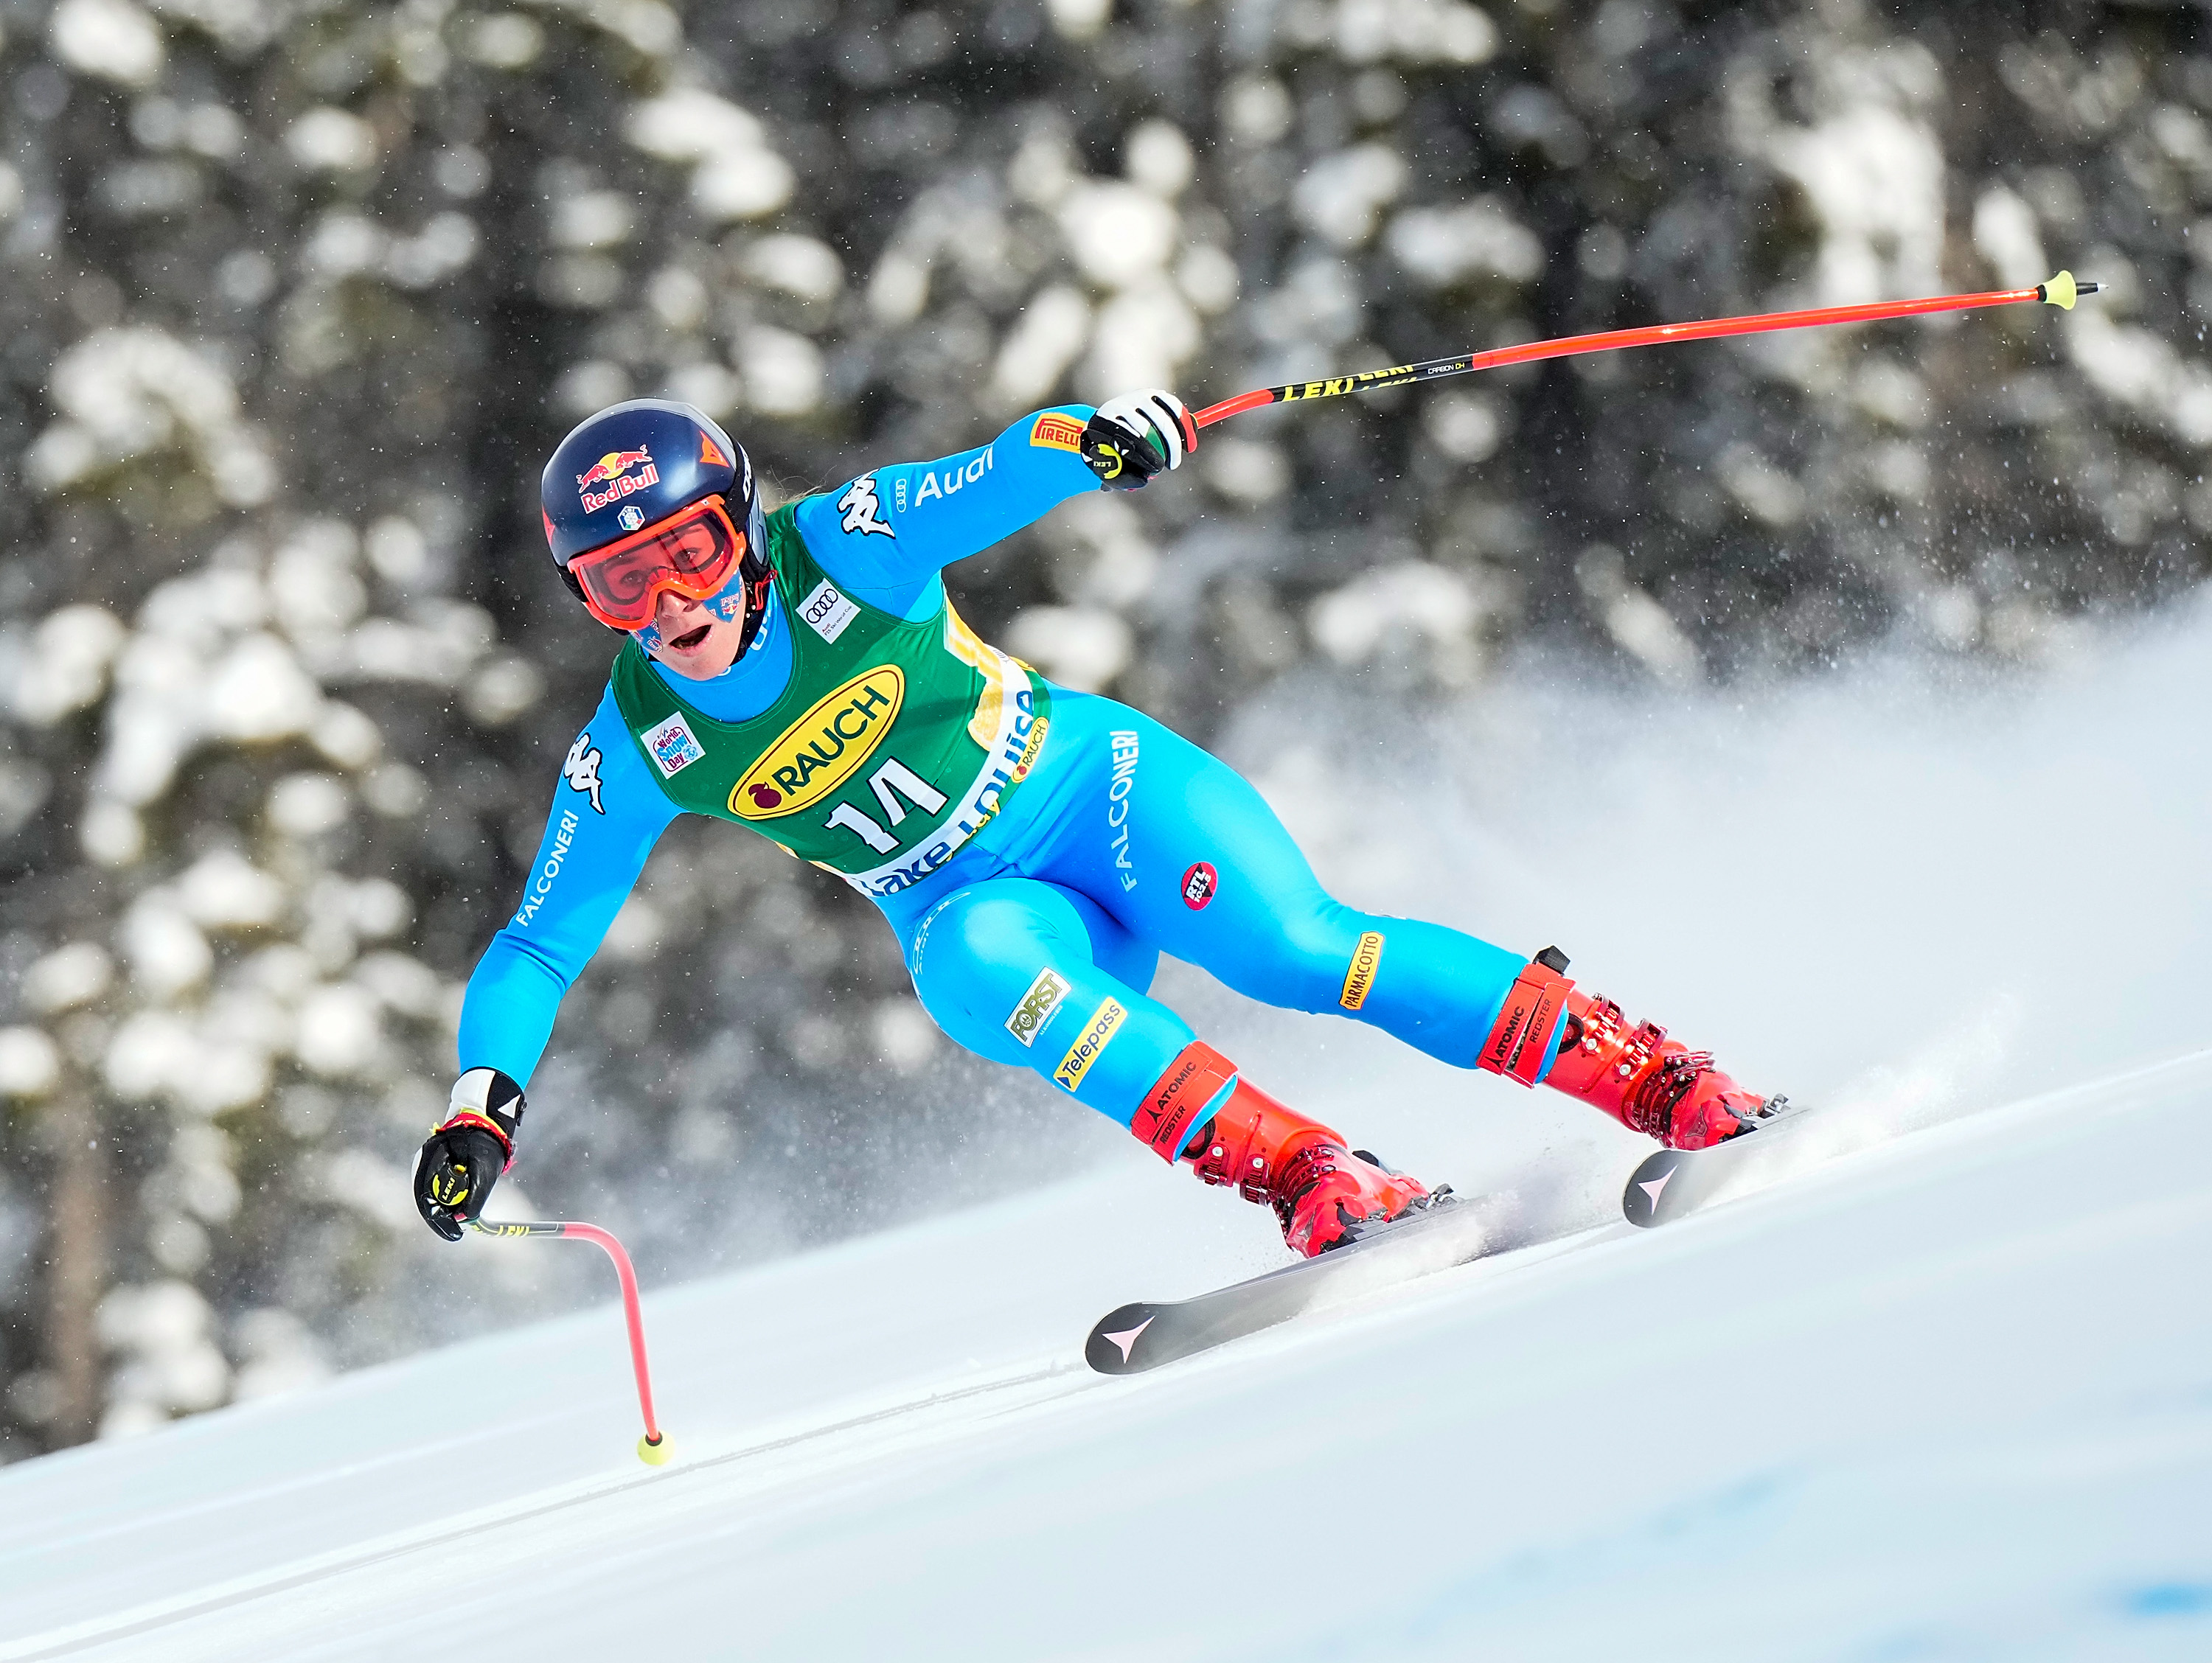 Dec 5, 2021; Lake Louise, Alberta, CAN; Sofia Goggia of Italy competes during women's Super G race at the Lake Louise Audi FIS alpine skiing World Cup at Lake Louise. Mandatory Credit: Eric Bolte-USA TODAY Sports